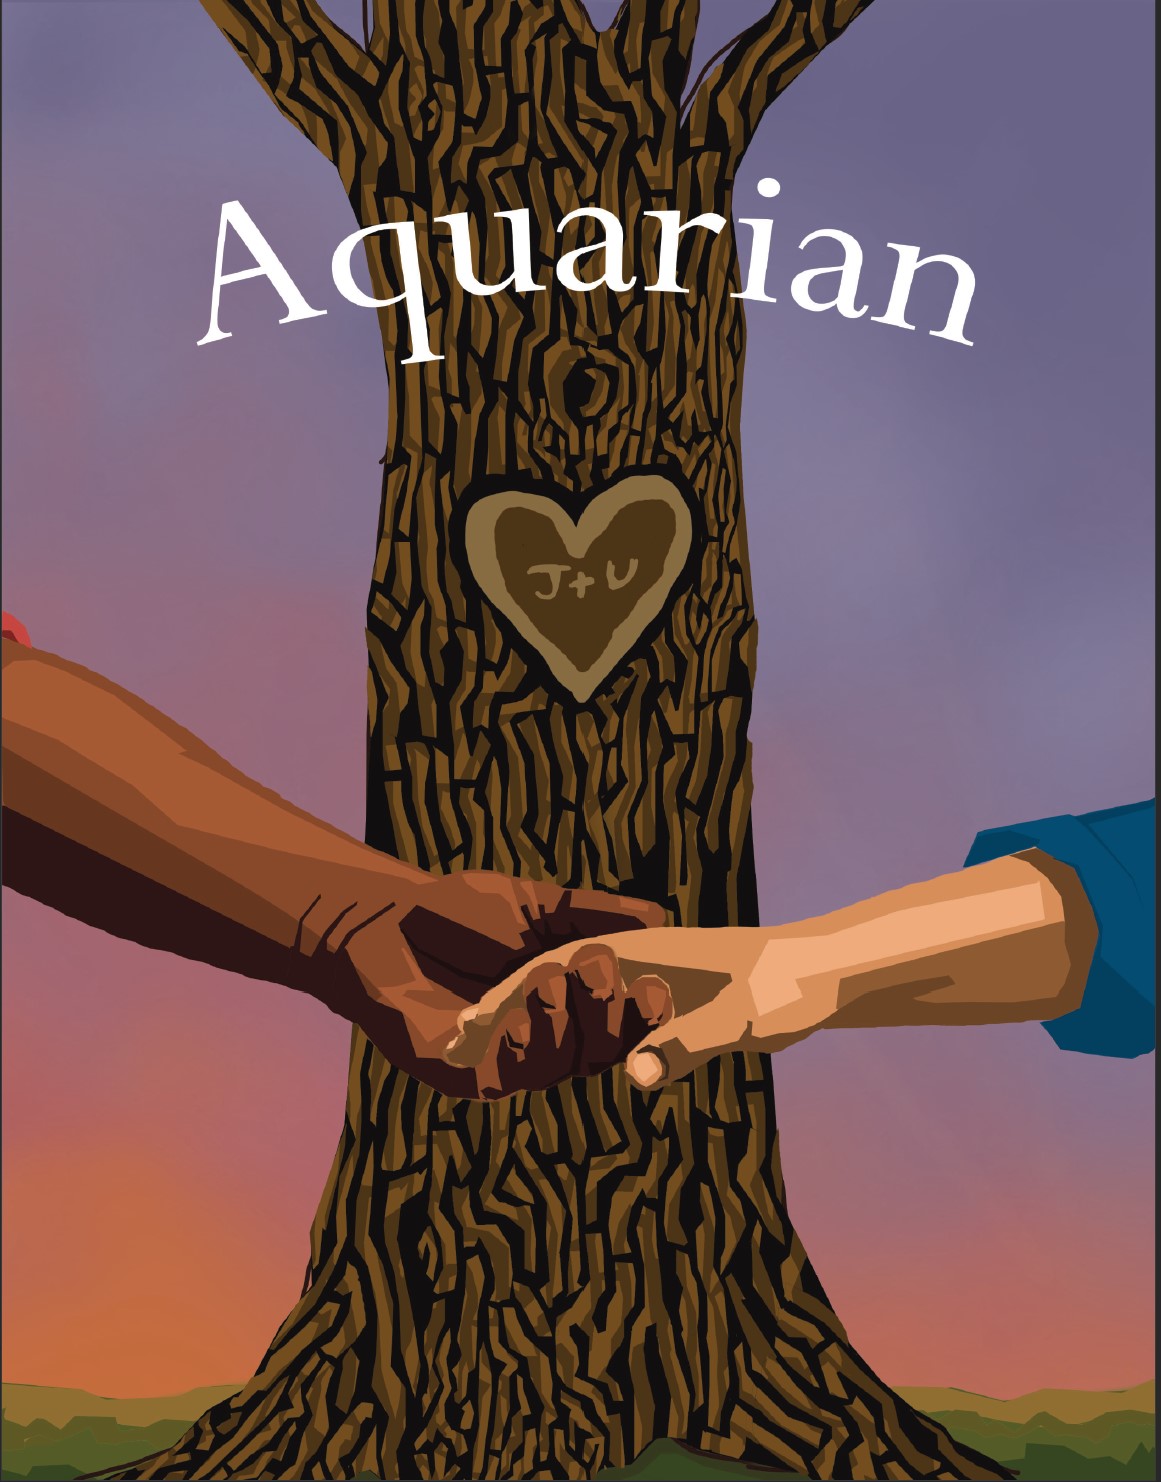 The cover. In white text over a digitally drawn image, the word Aquarian is rounded. Behind that, there is a brown tree with the letters J + U in a heart are carved. In front of the tree and below the title, are to hands clapsed together. Behind the tree is a colorful sunset with green grass.